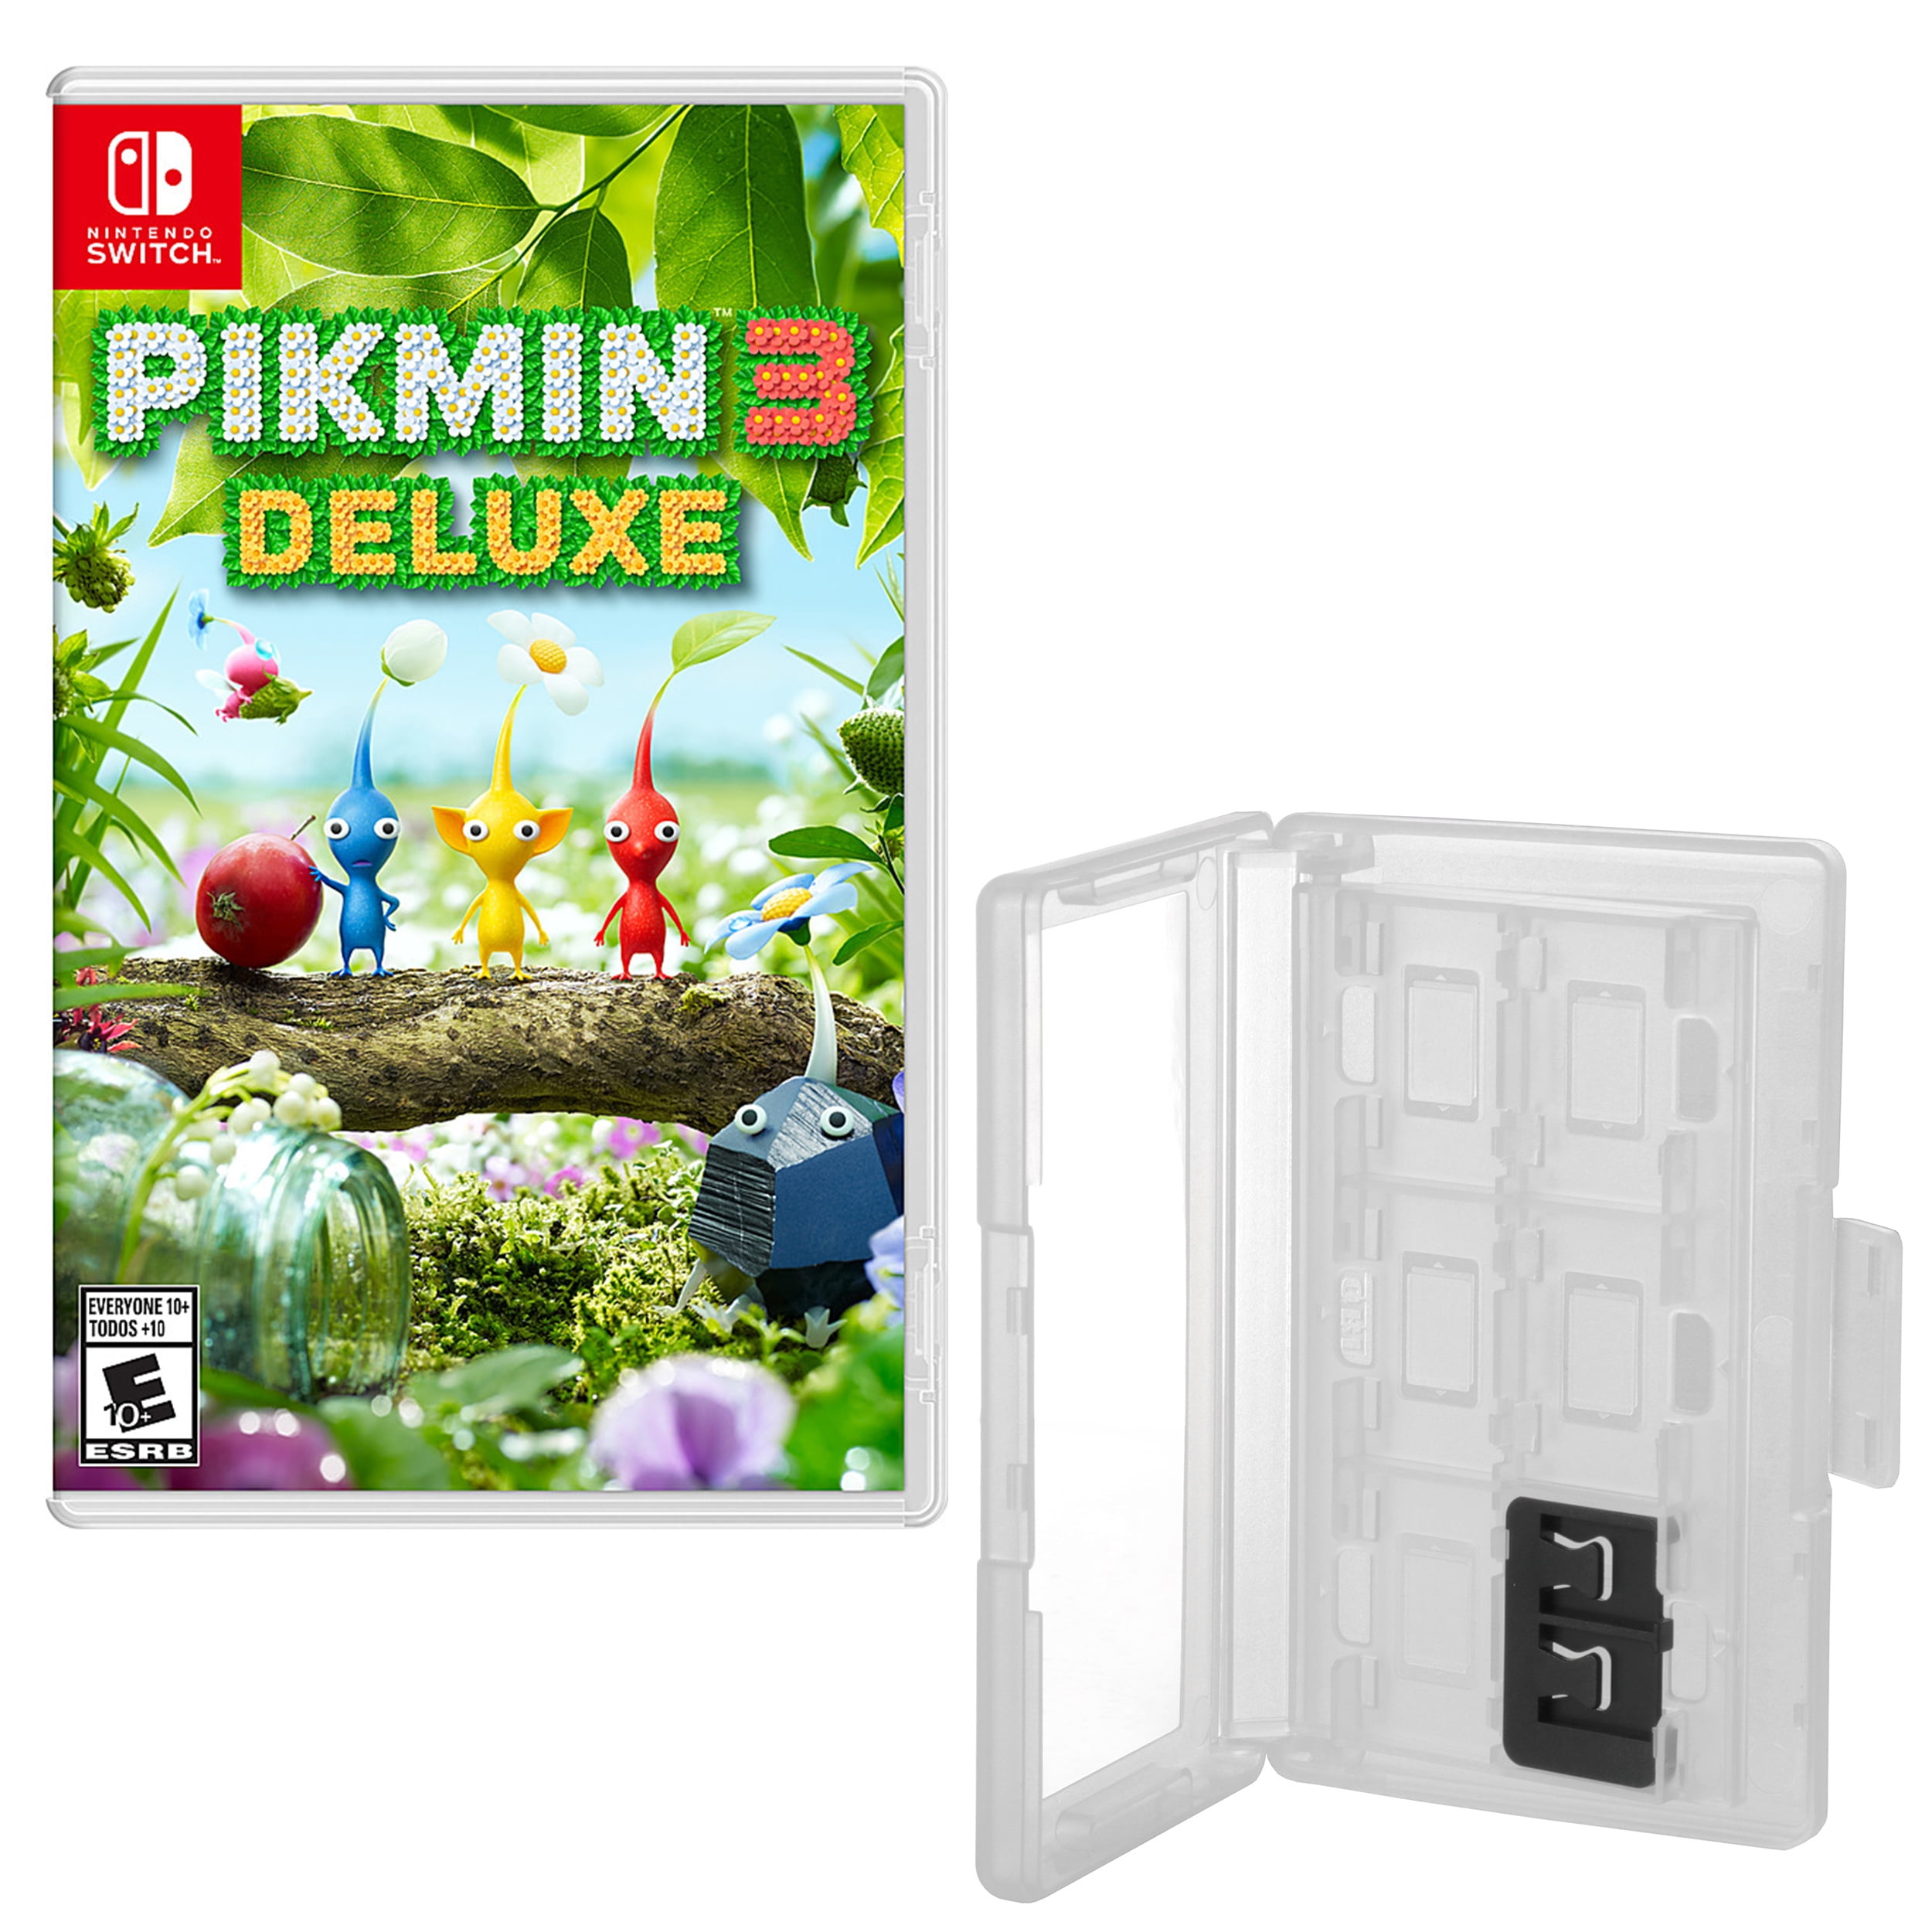 Pikmin 3 Deluxe with 12 Game Caddy for Nintendo Switch